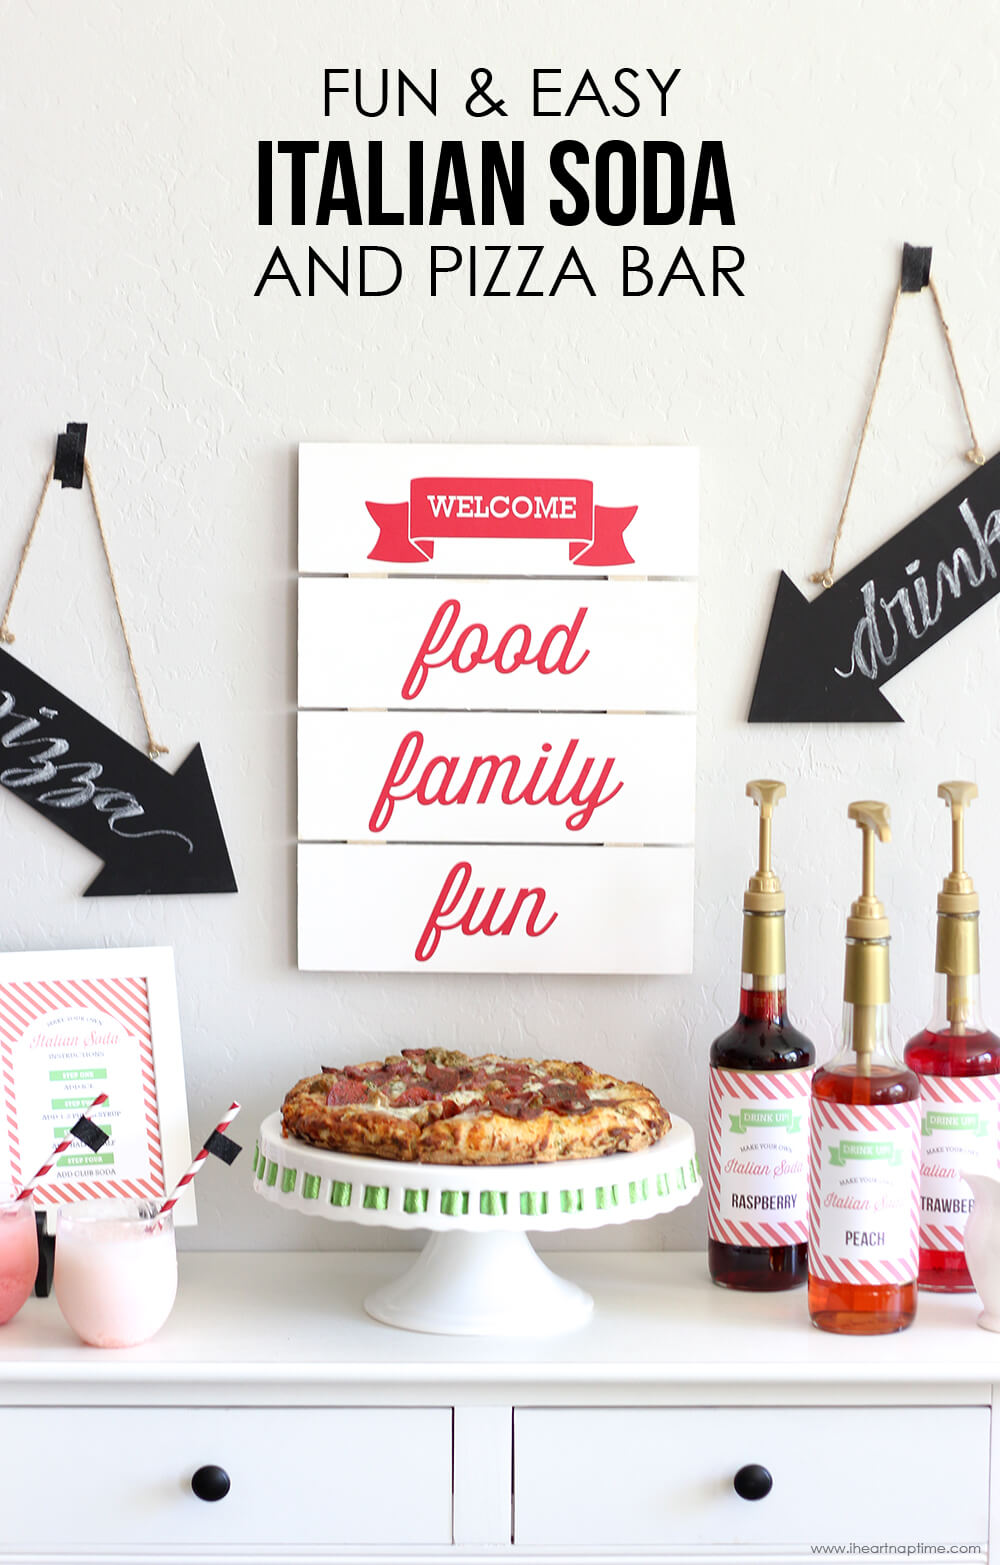 Hosting a fun family night doesn't have to be hard. Recreate this Easy Family Pizza Night pizza that your family (and friends!) will love!